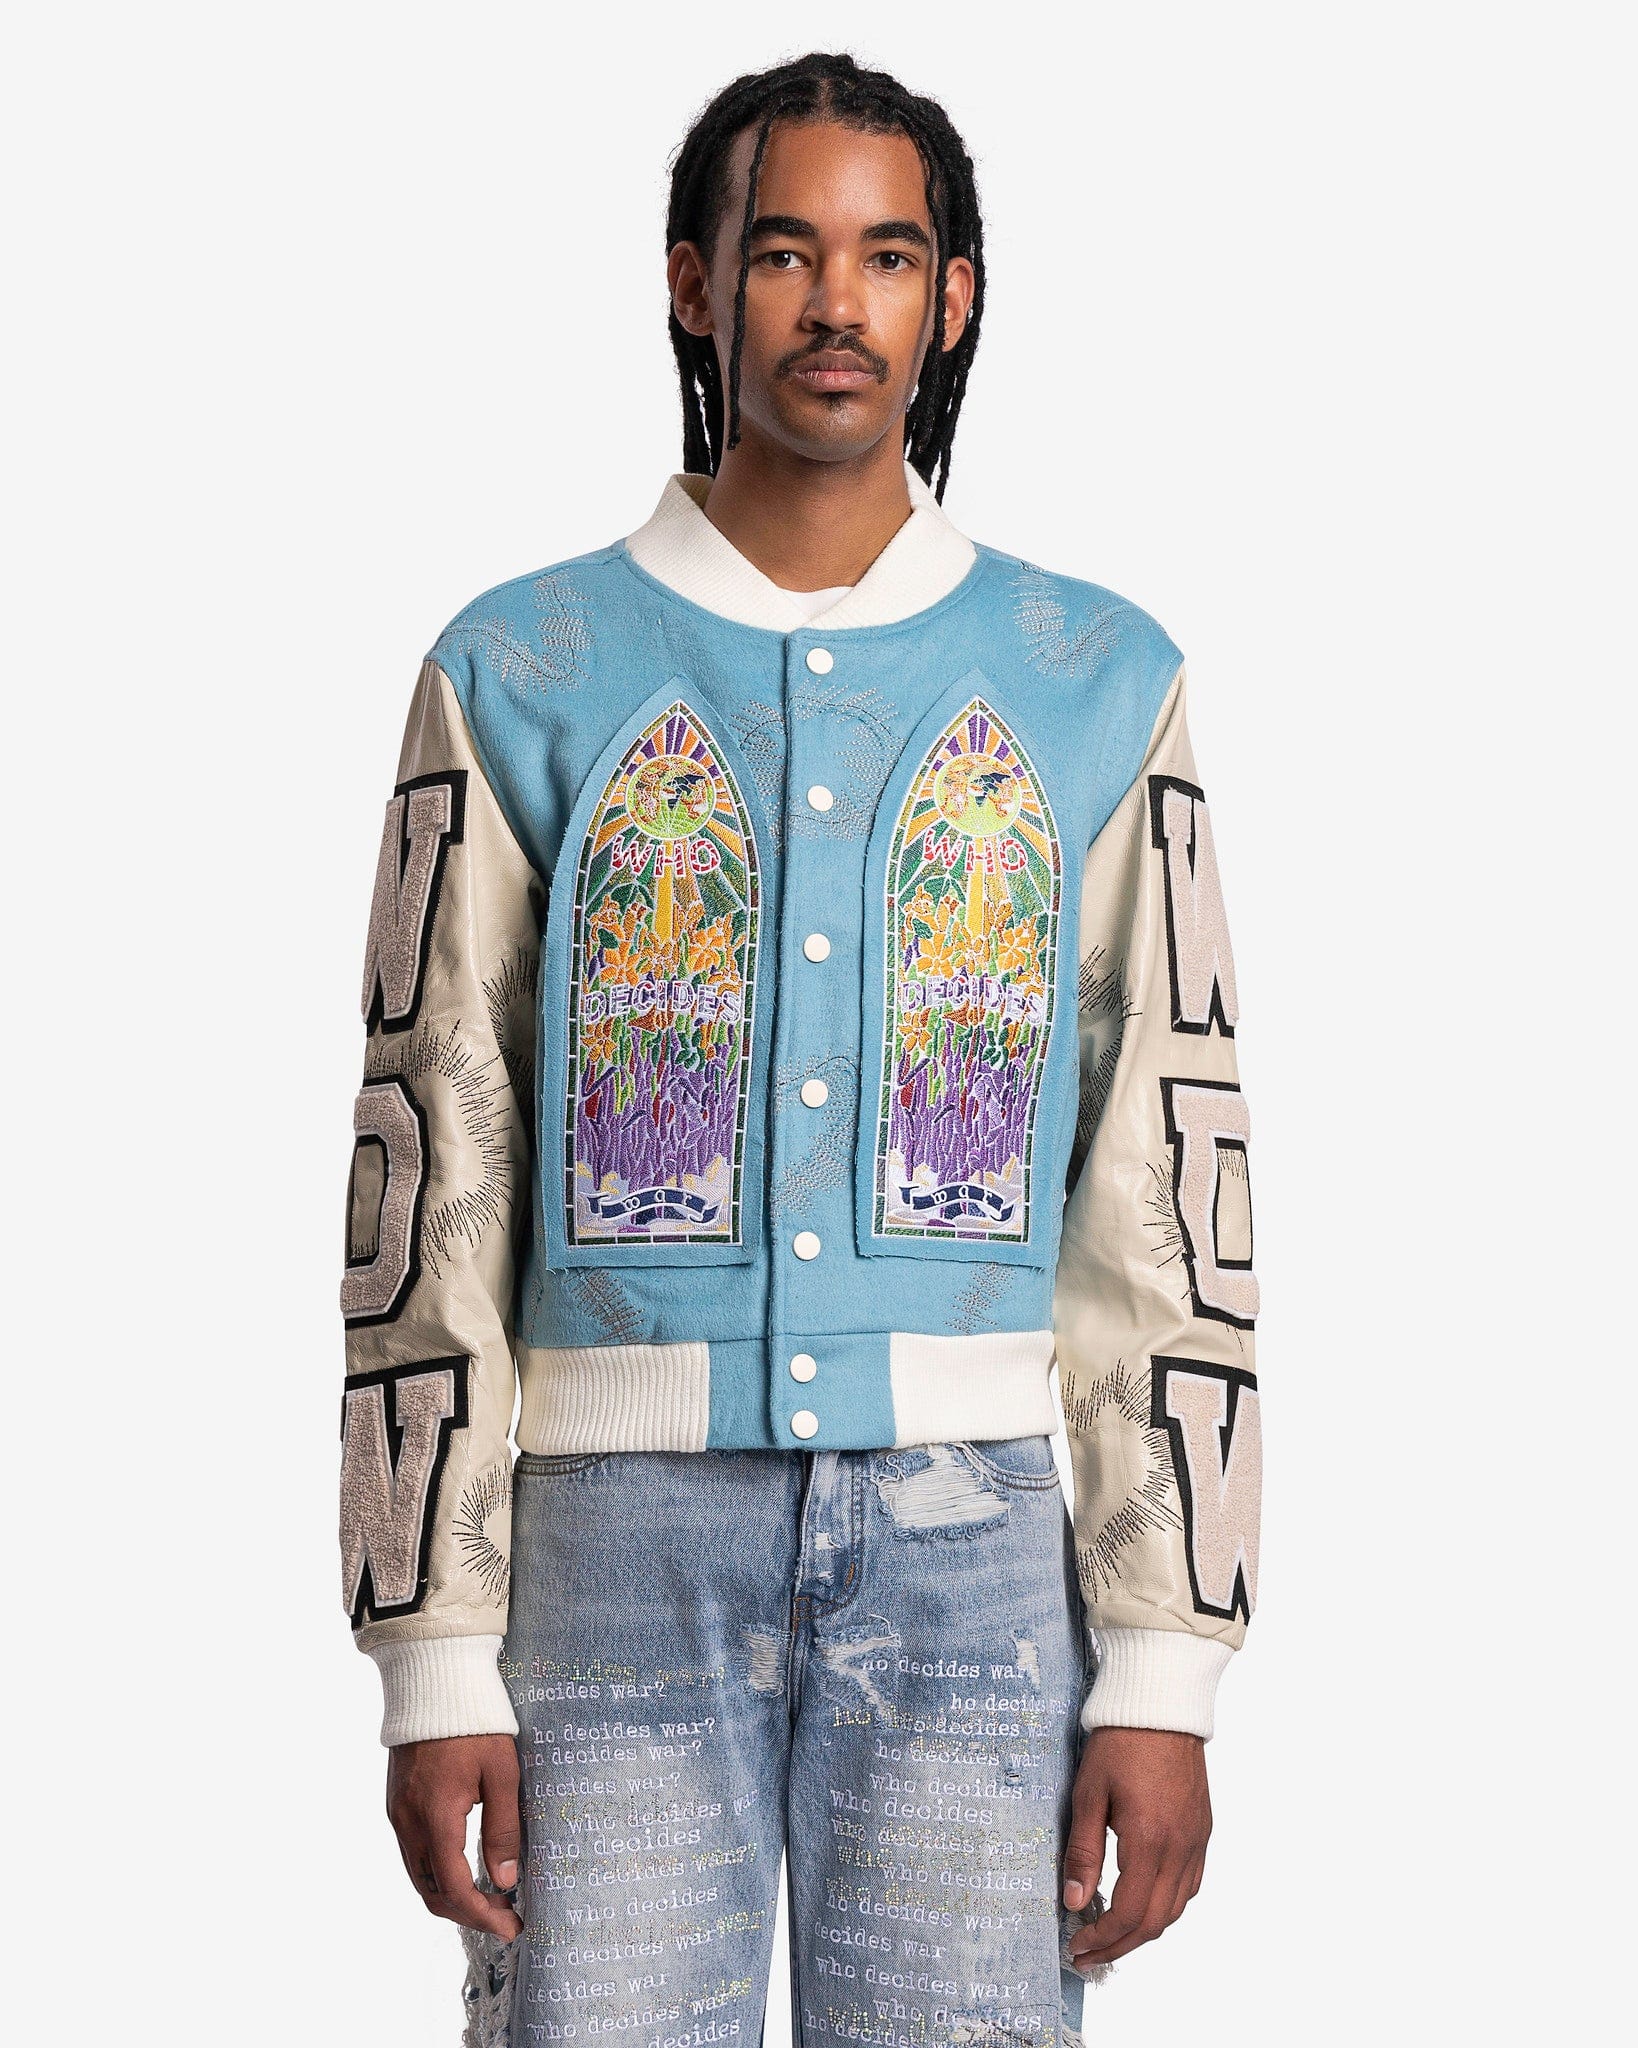 Dolce & Gabbana Stained Glass Window Style Print Bomber Jacket